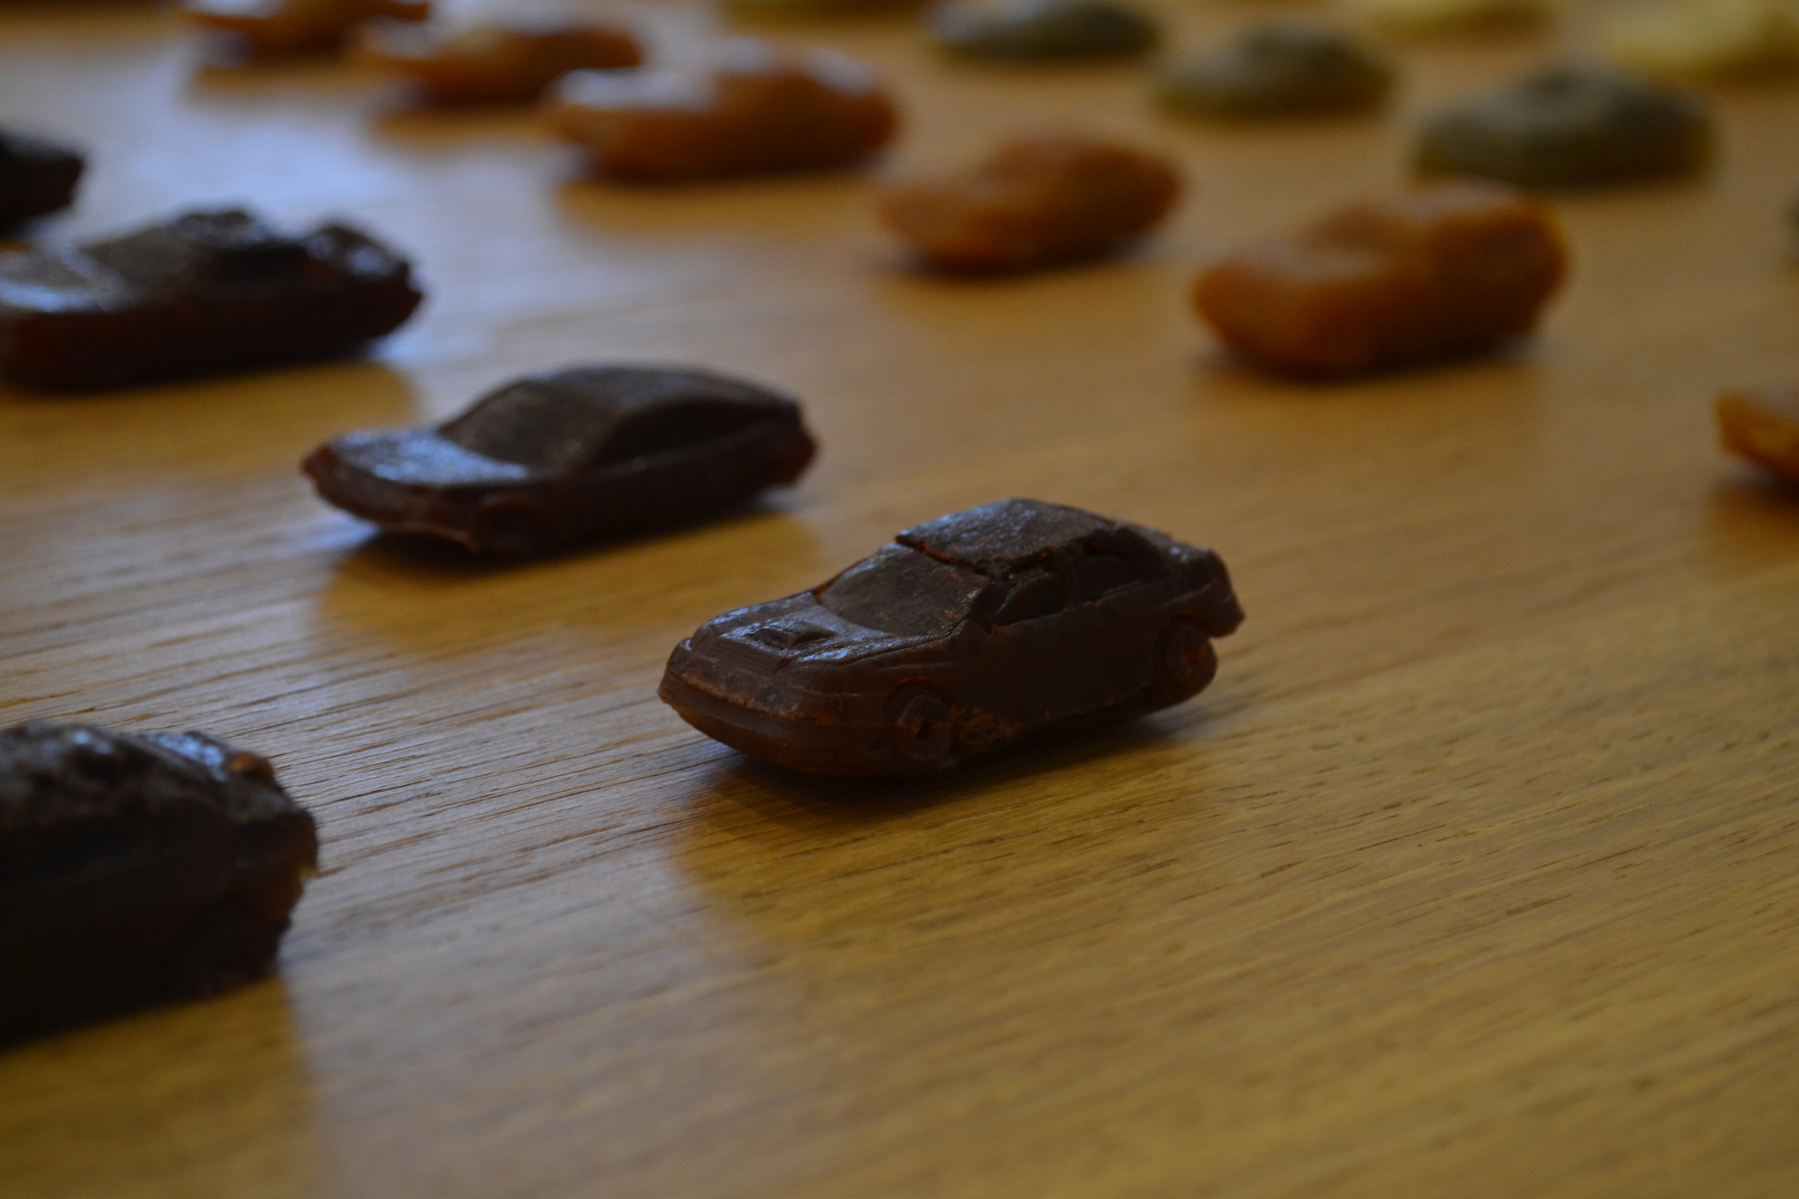 Toy Cars (Madeleines and Tea)